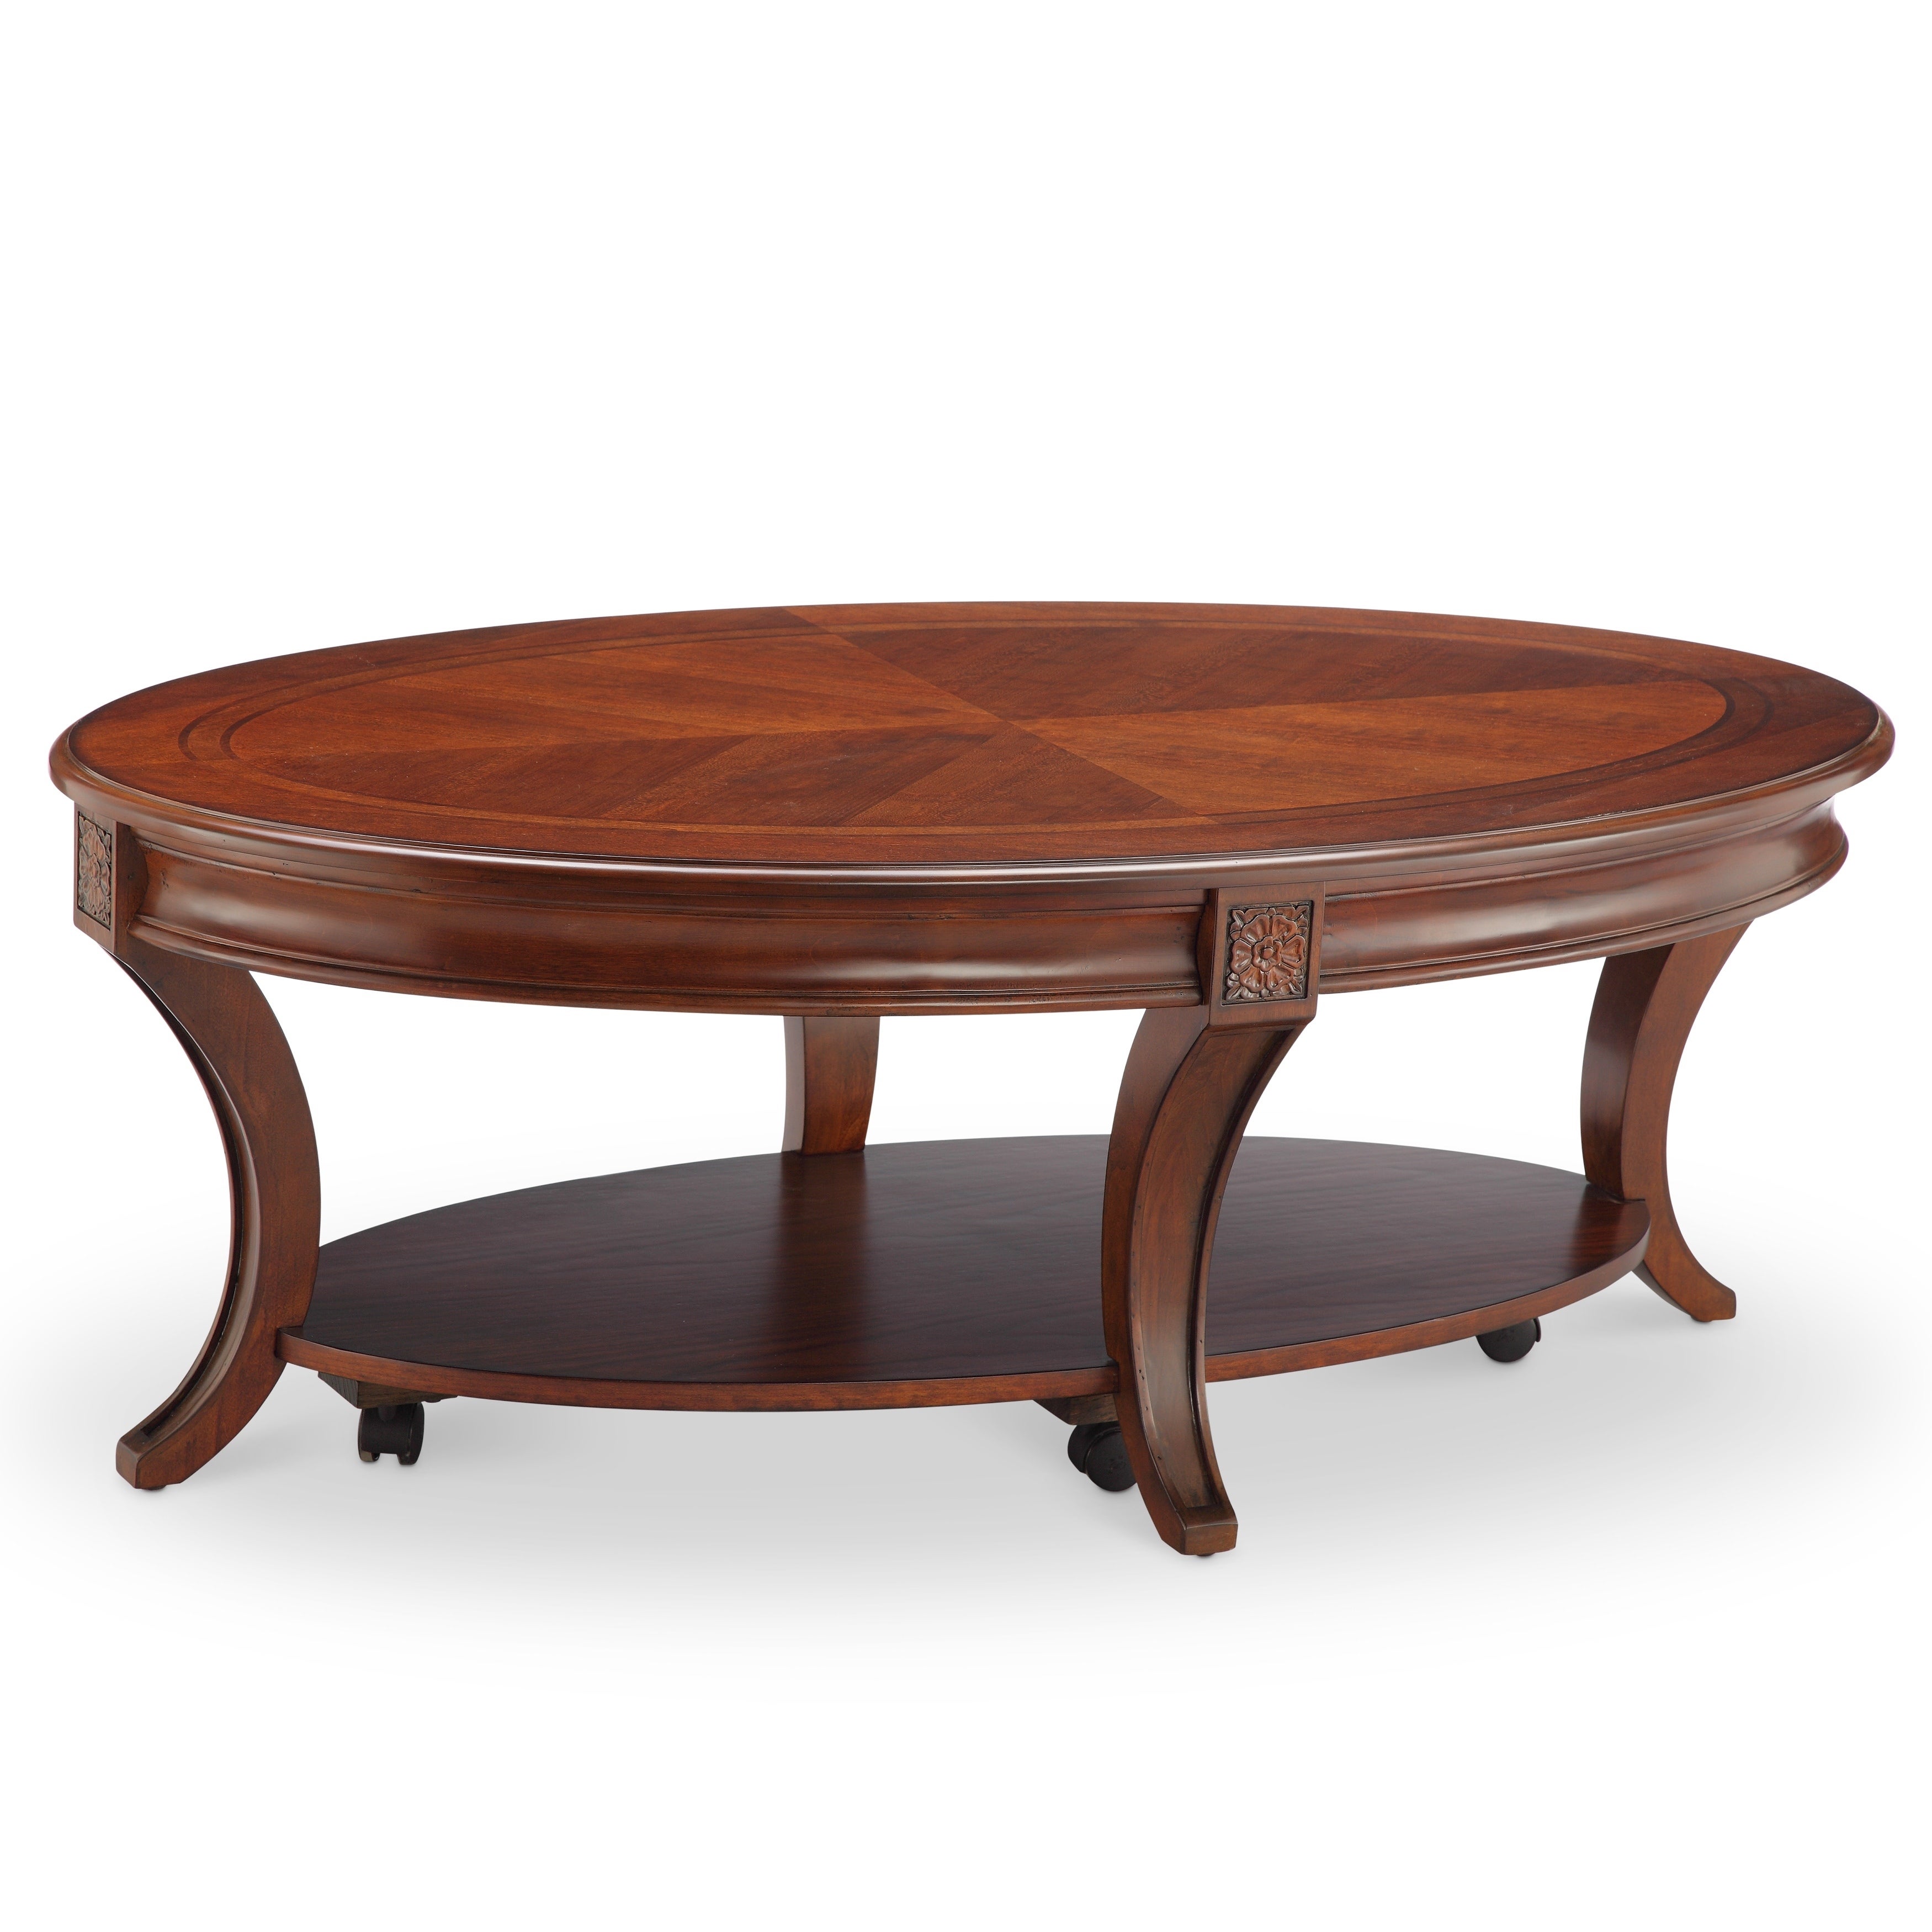 winslet traditional cherry oval coffee table with casters cocktail end tables free shipping today ethan allen furniture reviews ashley tures dinette sets bookcase glass doors